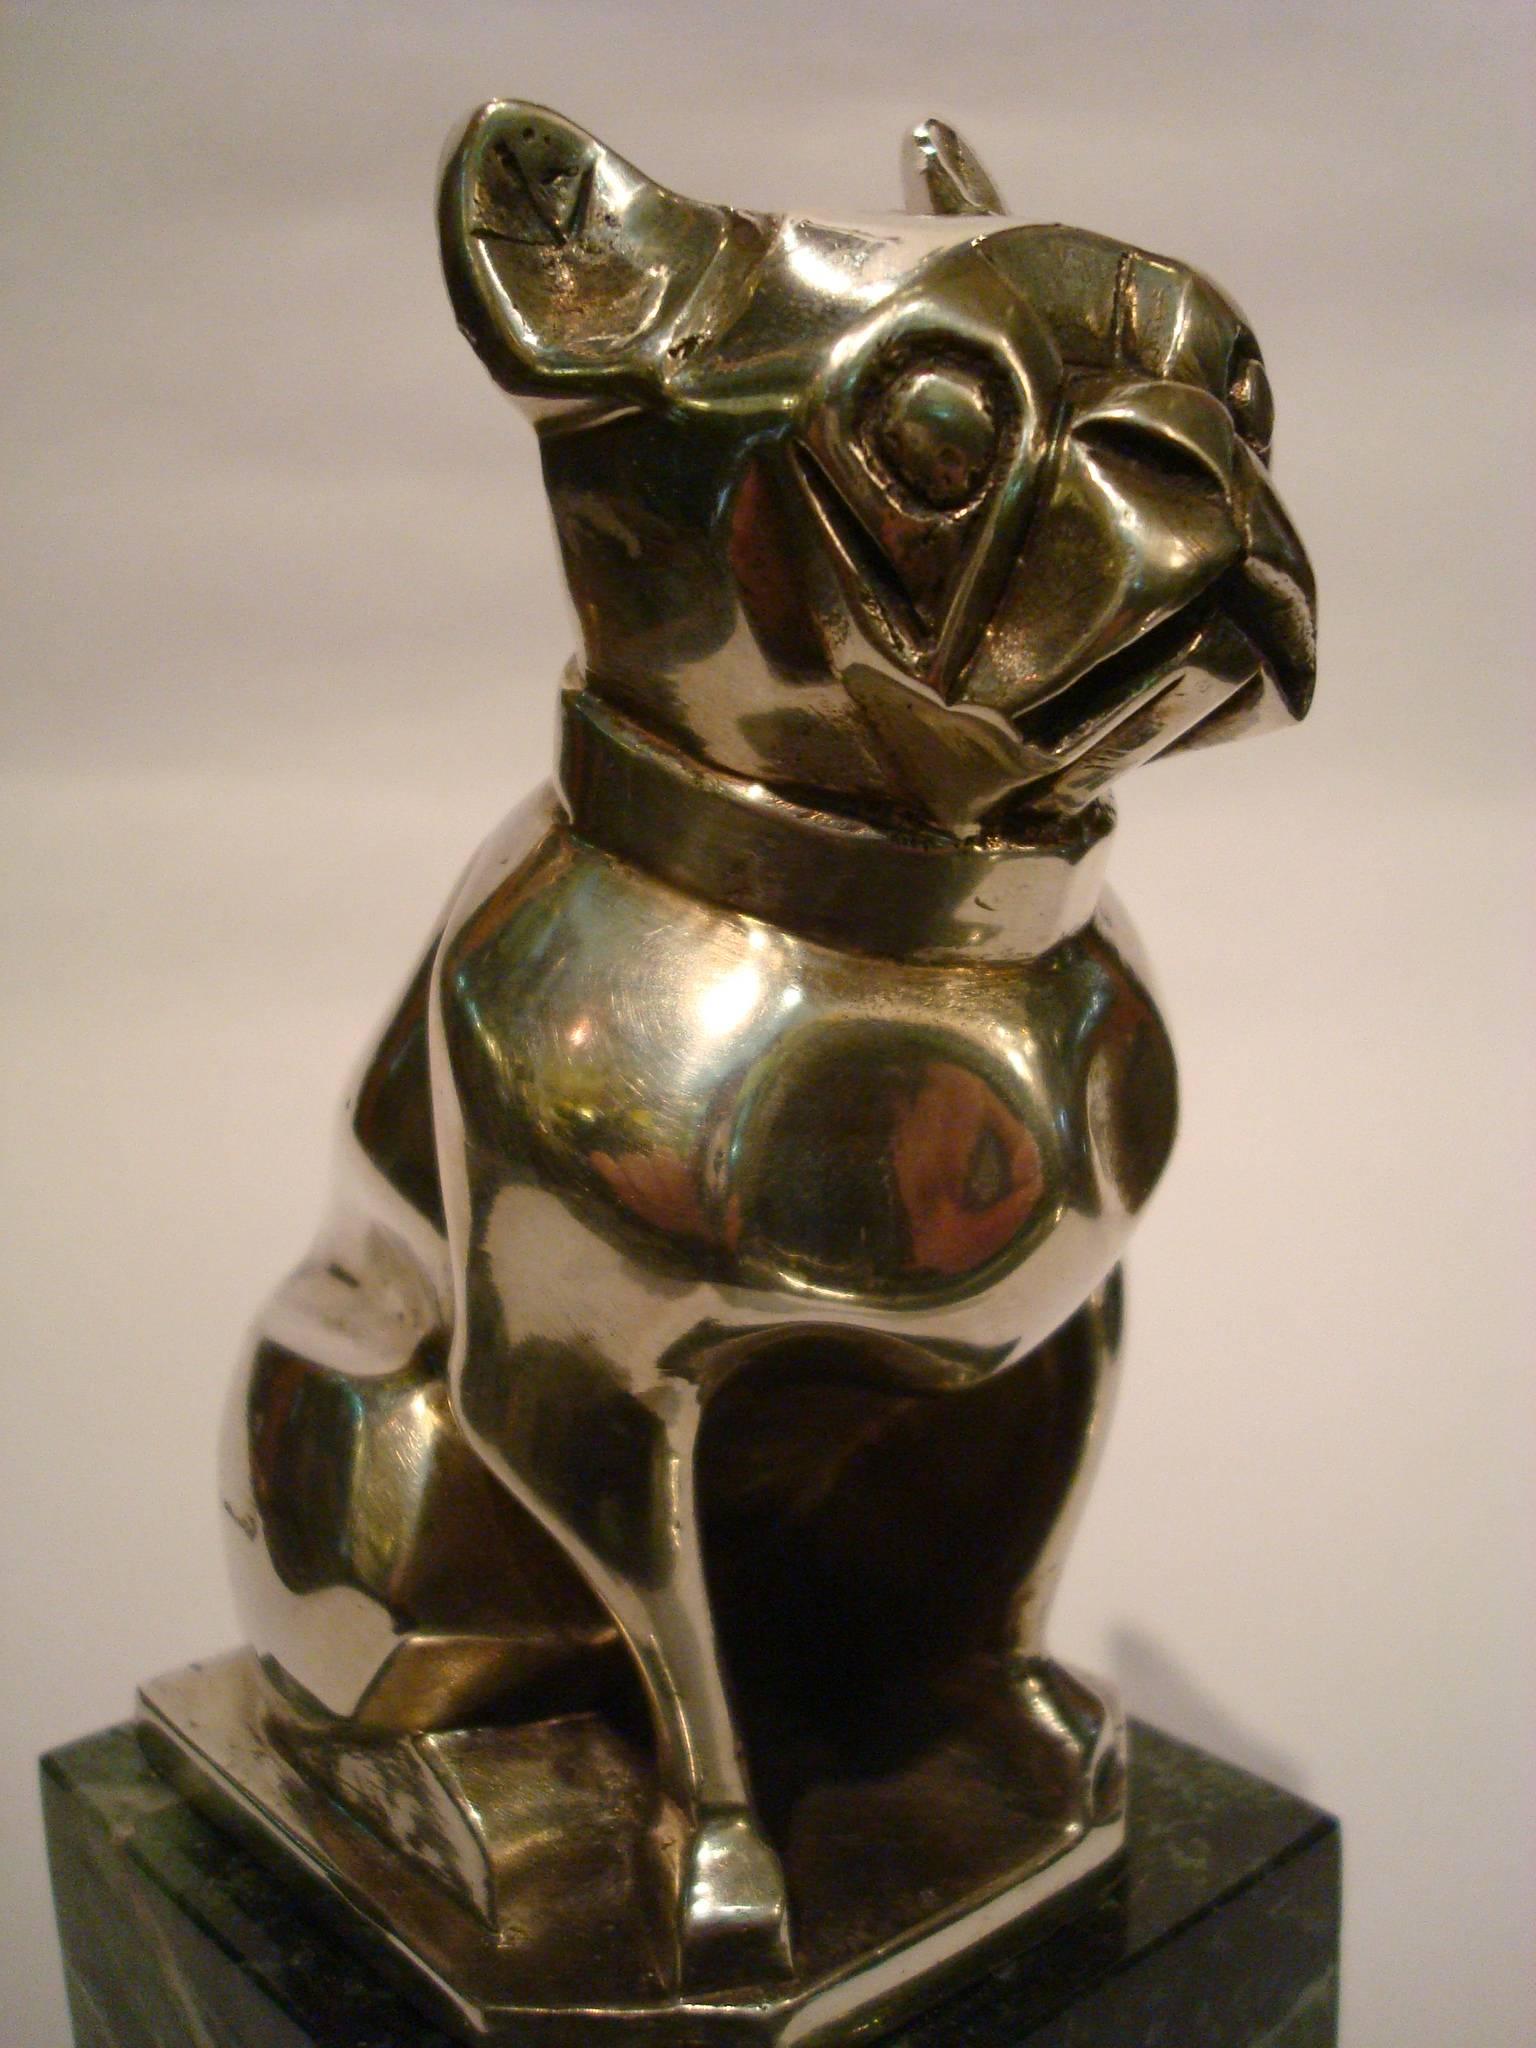 Art Deco French bulldog single bookend or paperweight, France, 1925. Bronze silver plated mounted over green marble base. Marked France.